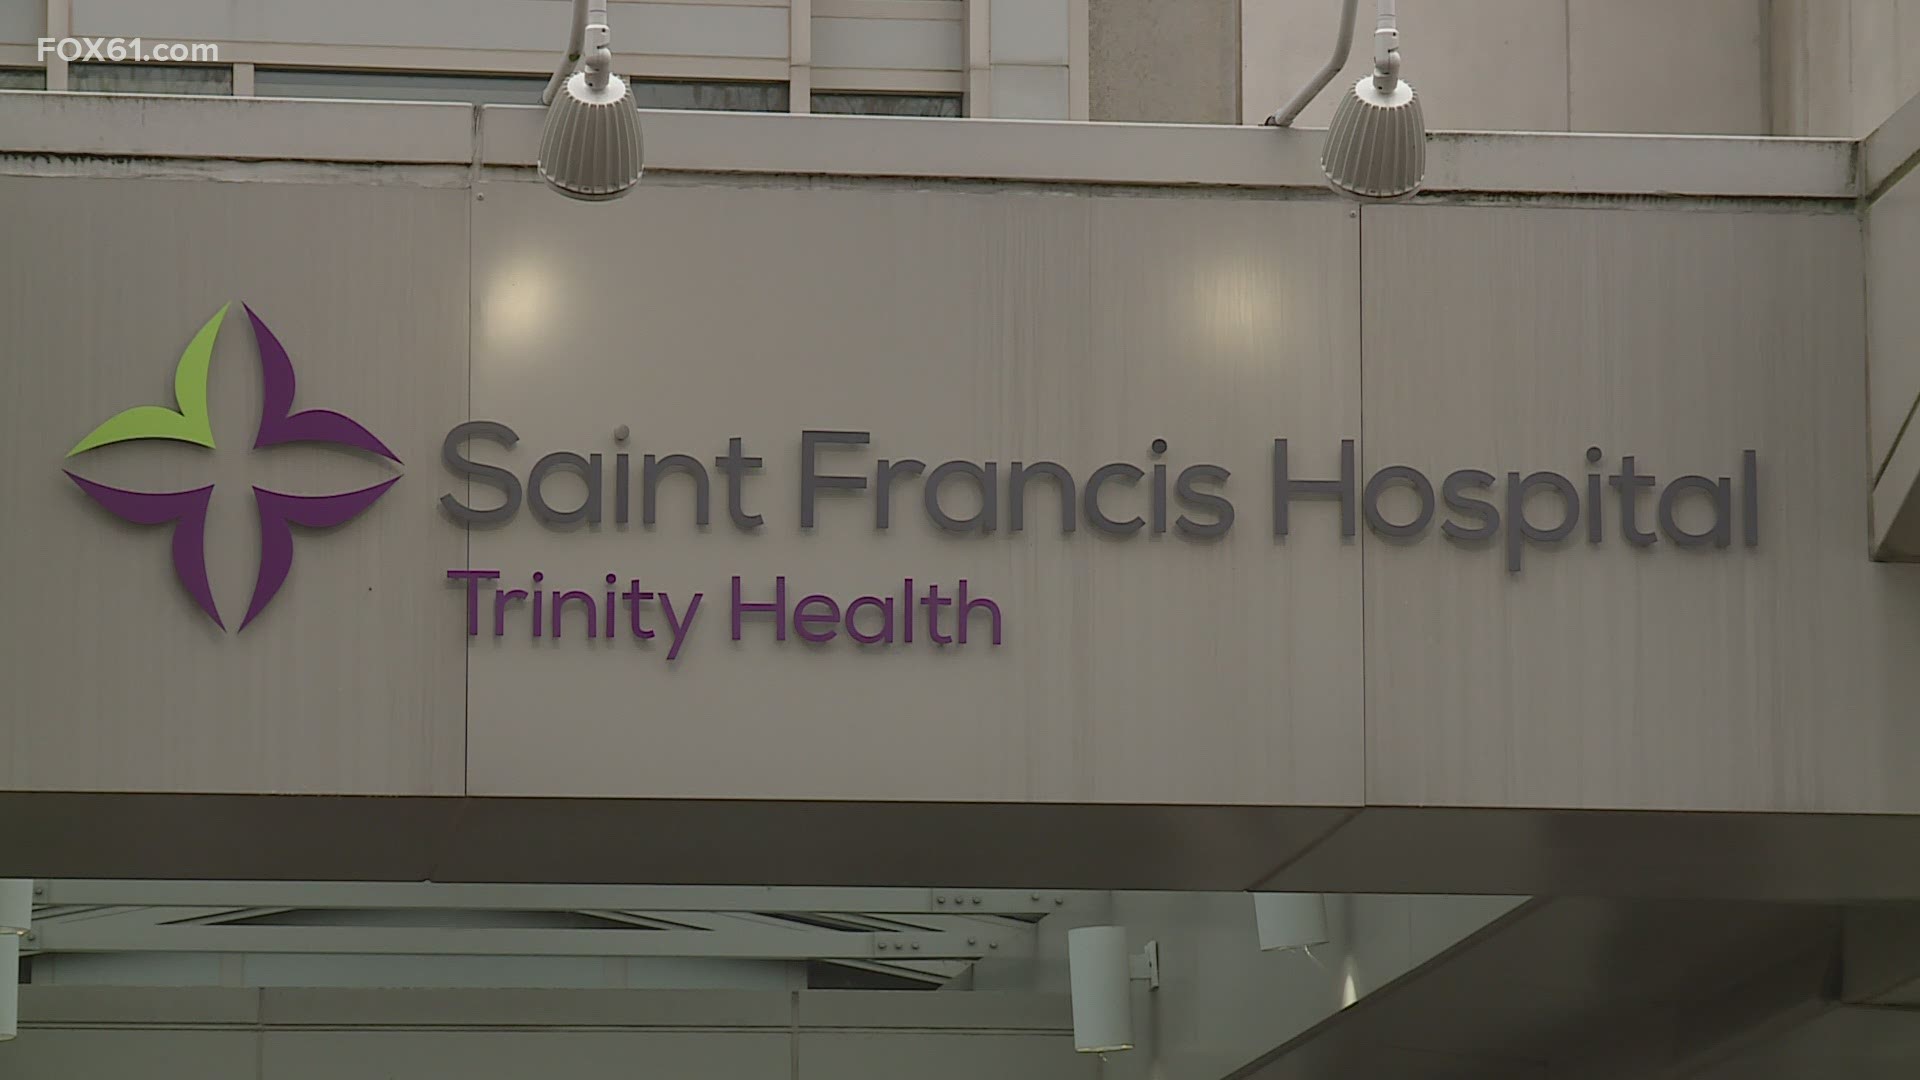 St. Francis, Yale New Haven Hospital announced that no visitors are allowed there for the time being